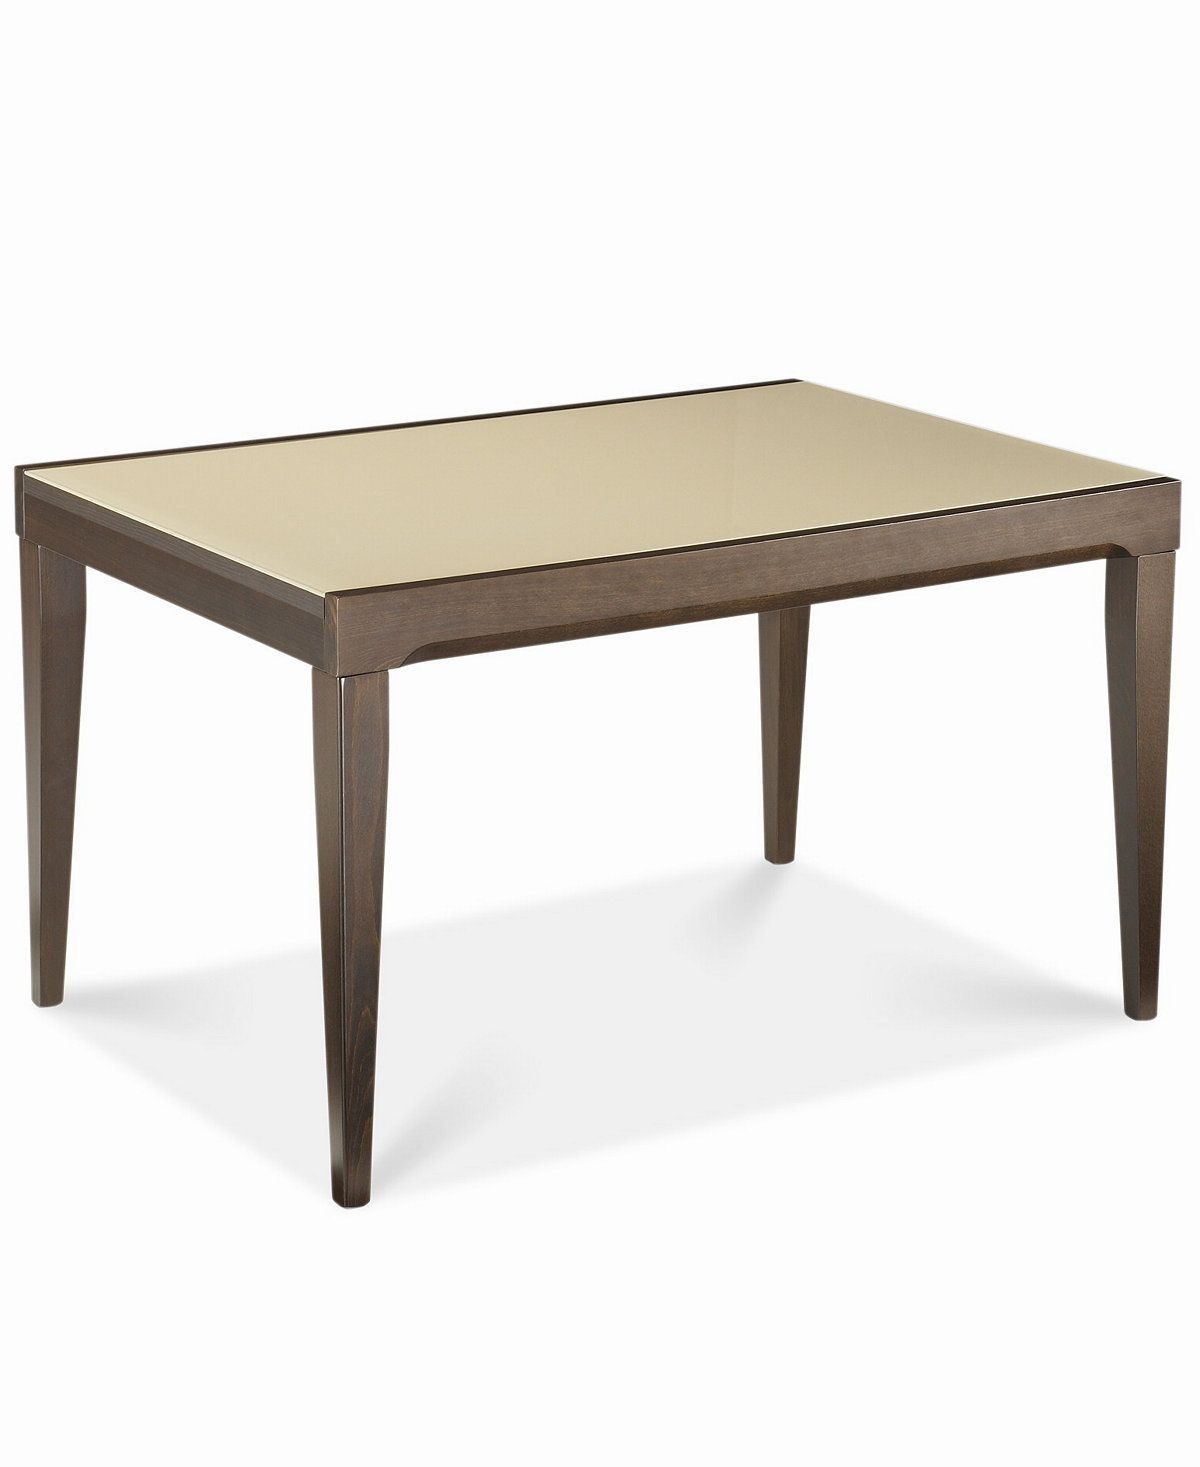 Café Latte Glass Top Expandable Dining Table At Macy's. $600. Starts Inside 2018 Norwood 7 Piece Rectangular Extension Dining Sets With Bench, Host & Side Chairs (Photo 14 of 20)